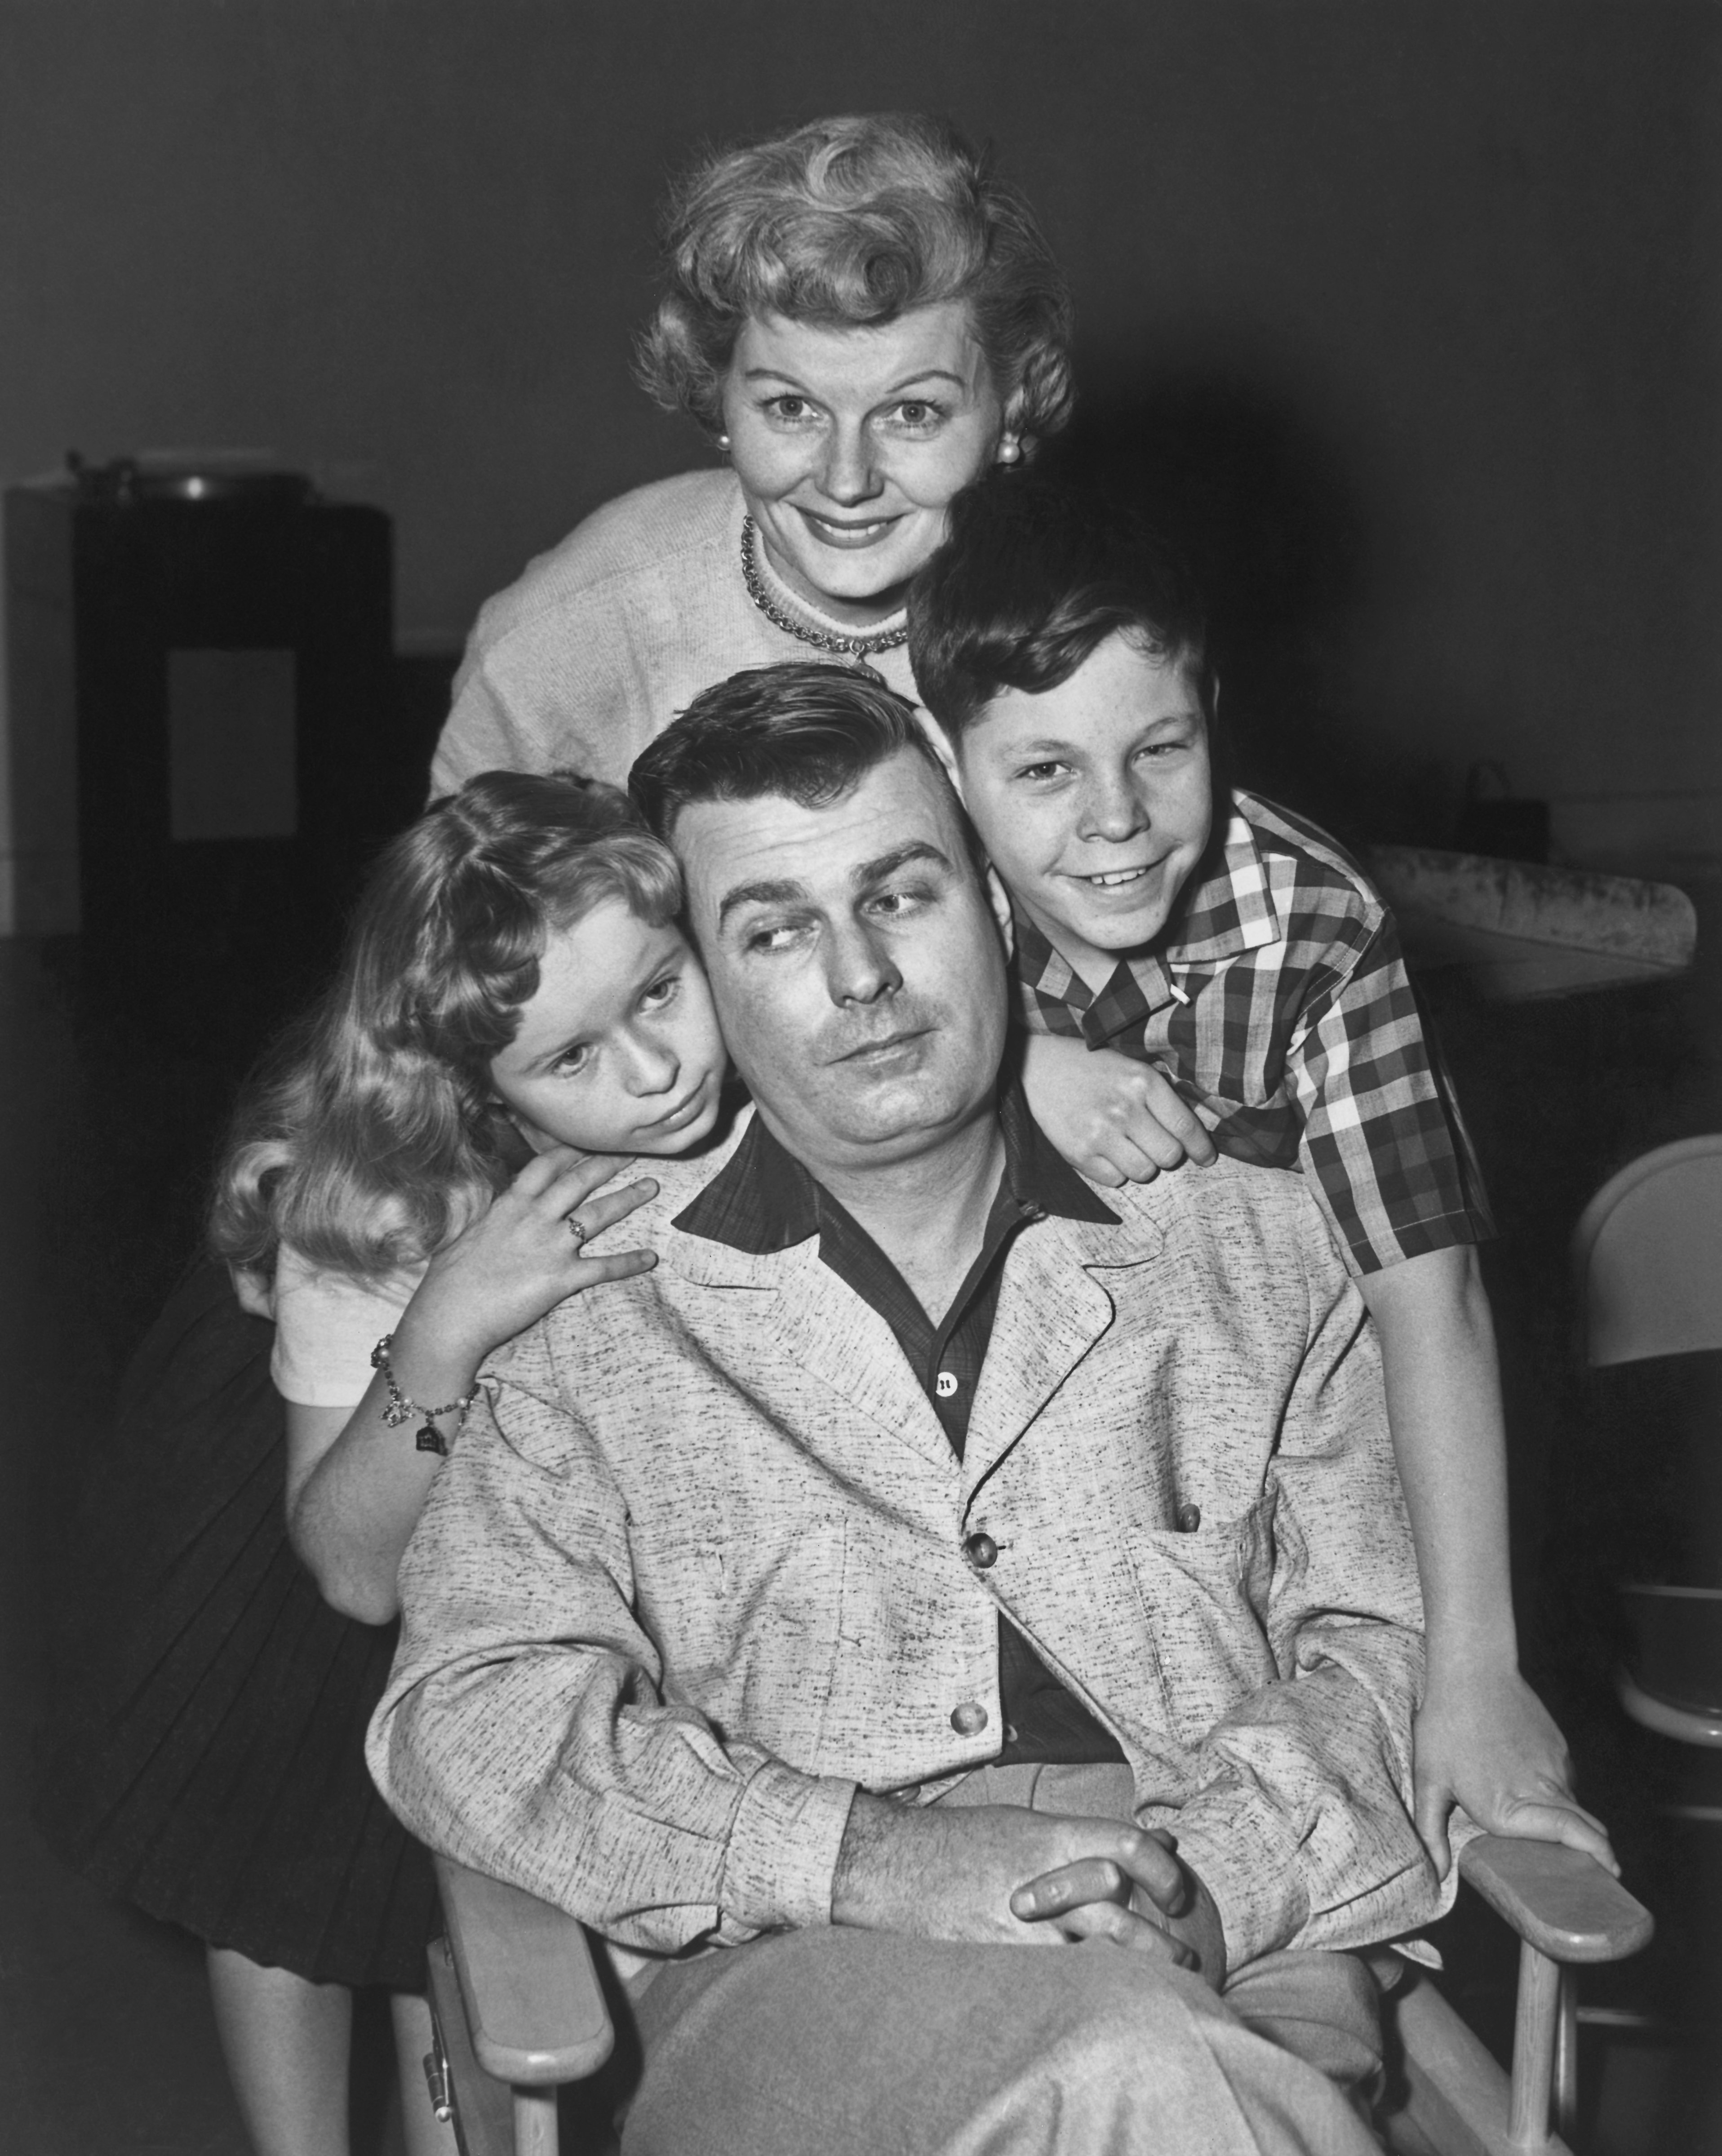 Barbara Billingsley, Stephen Dunne and child actors Beverly Washburn and Ted Marc in 1955 | Photo: Getty Images